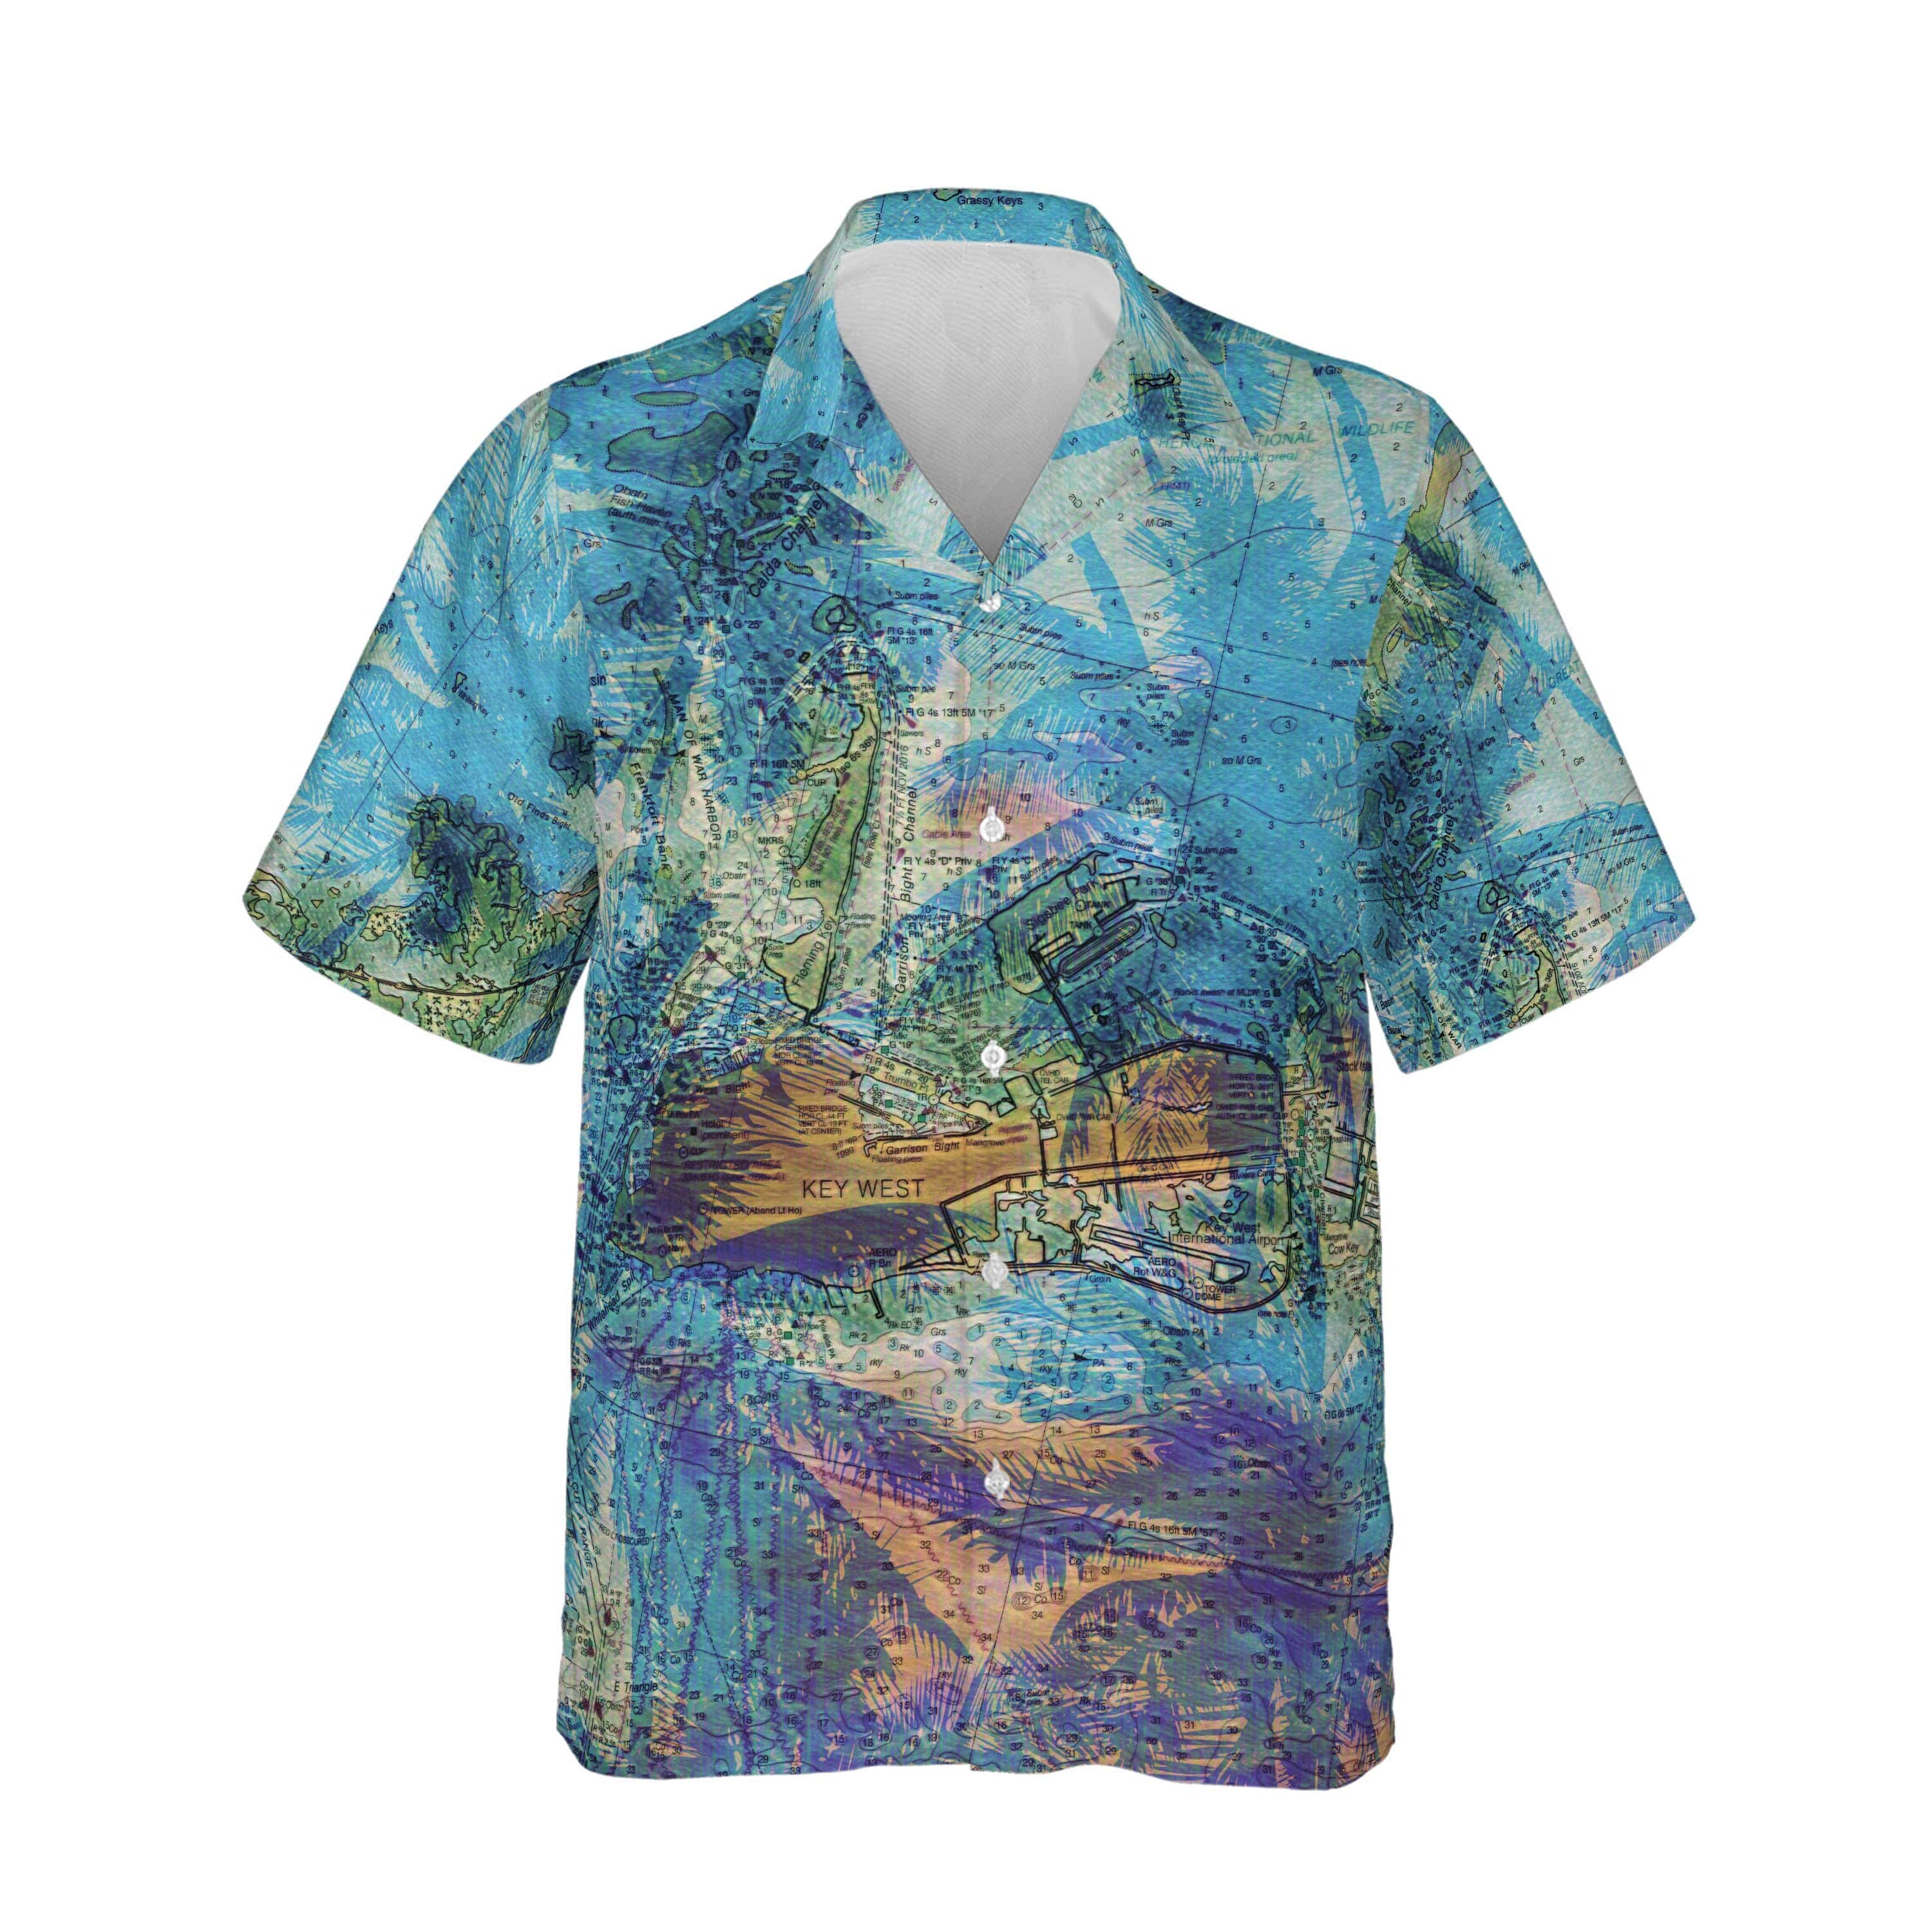 The Key West Beach Painting Camp Shirt